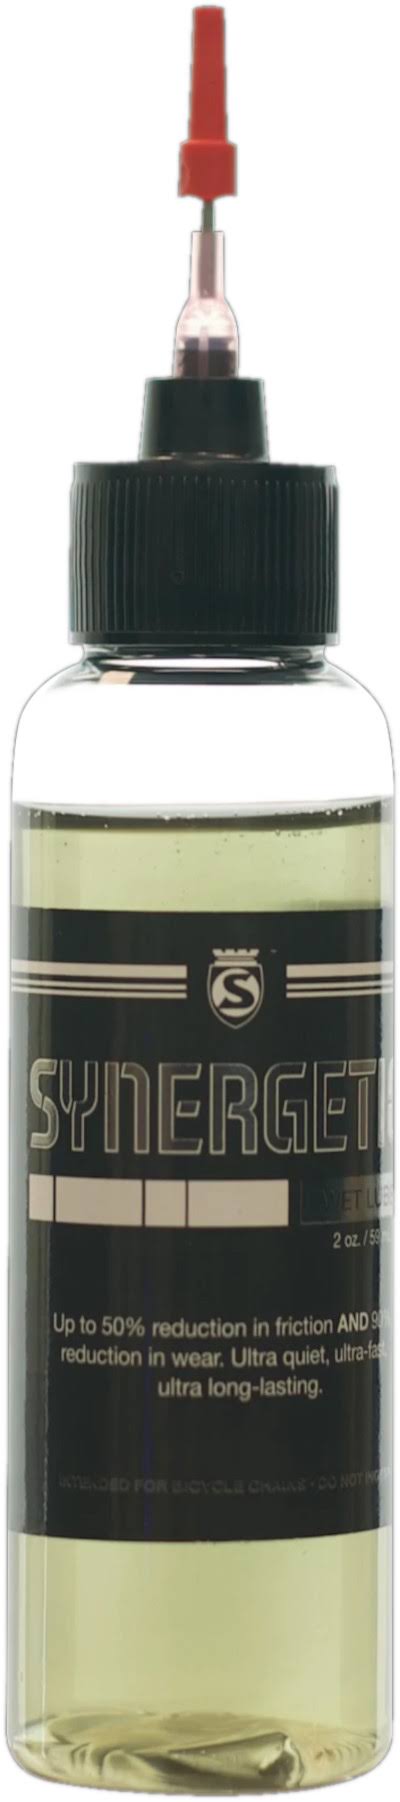 Silca Synergetic Drip 2oz Lube